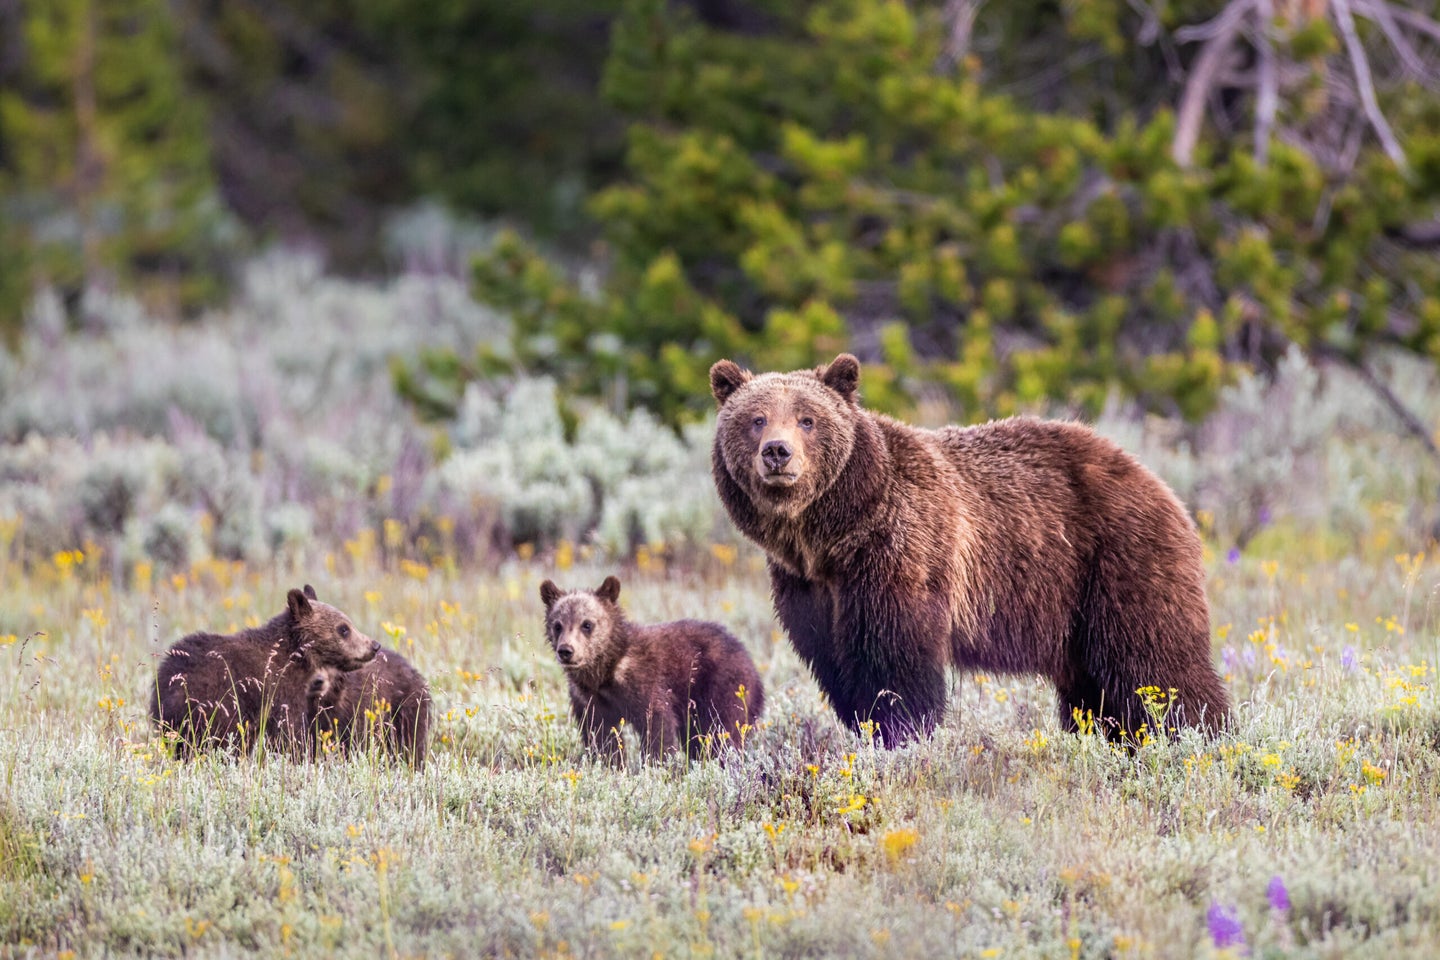 Grand Teton National Park's famous bear, Grizzly 399, along with three cubs, in the fields near Pilgrim Creek.